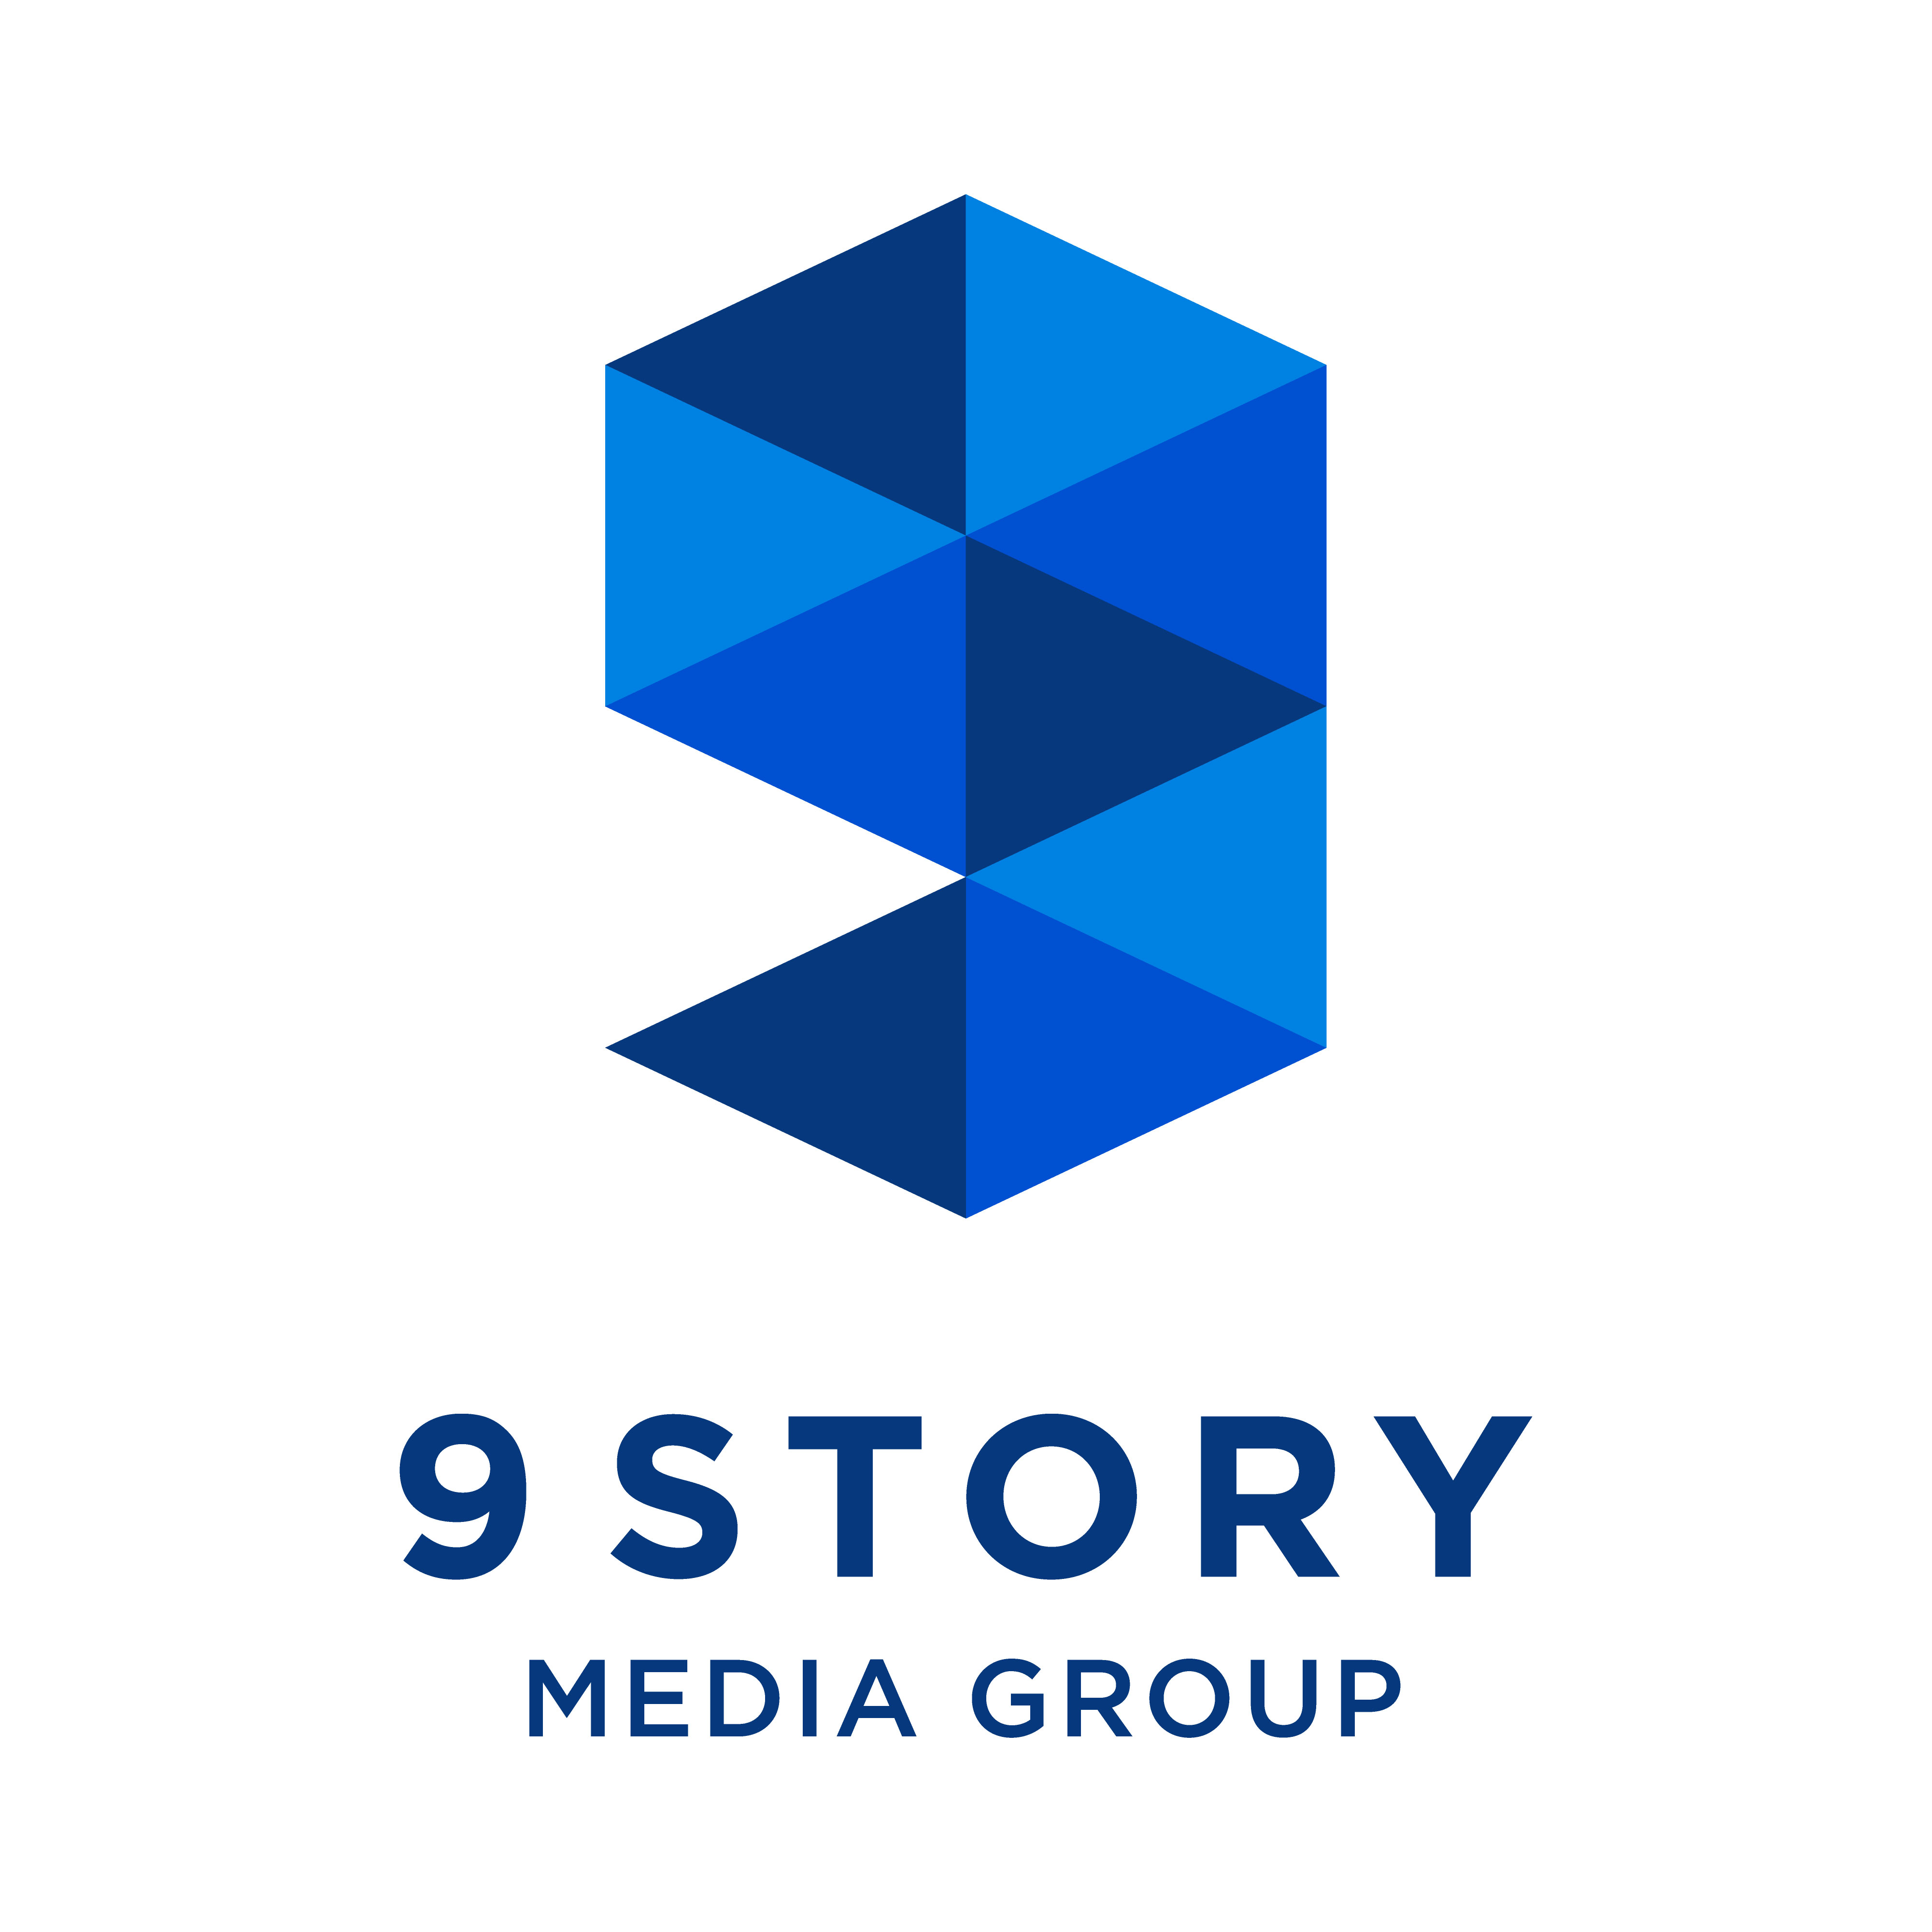  9 Story Media Group Acquires Asian Animation Studio